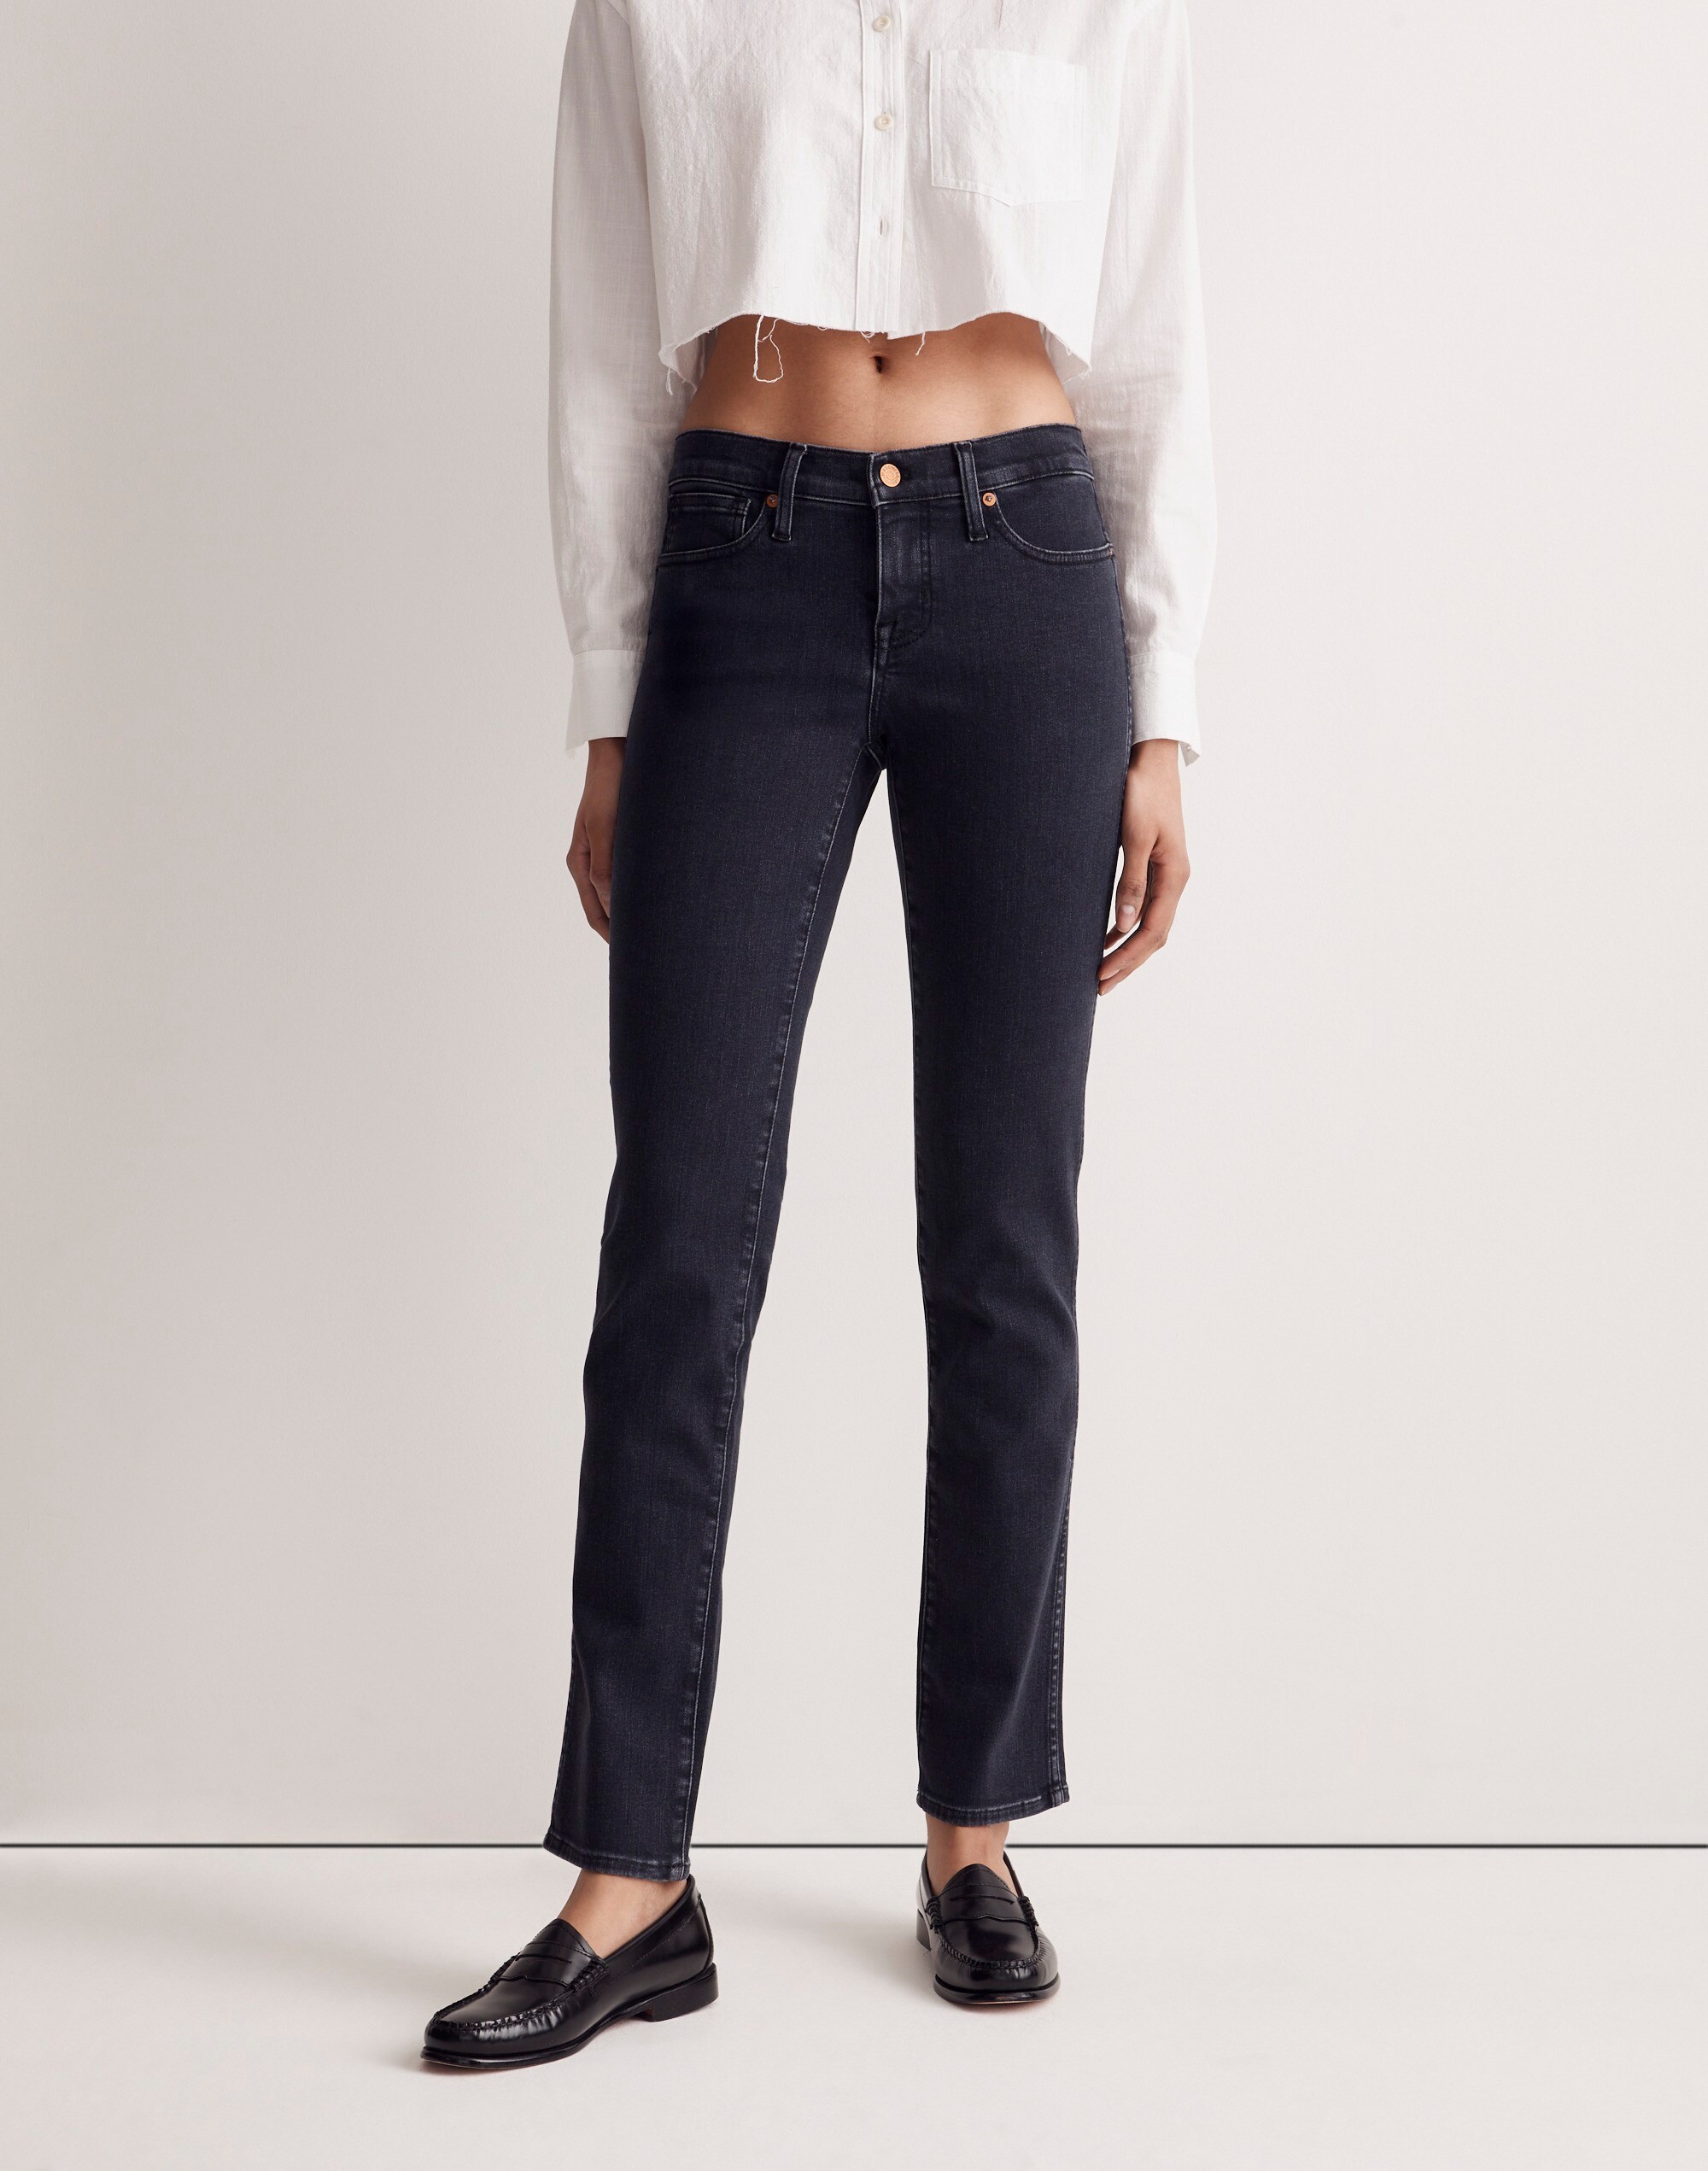 Low-Rise Stovepipe Jeans in Lunar Wash